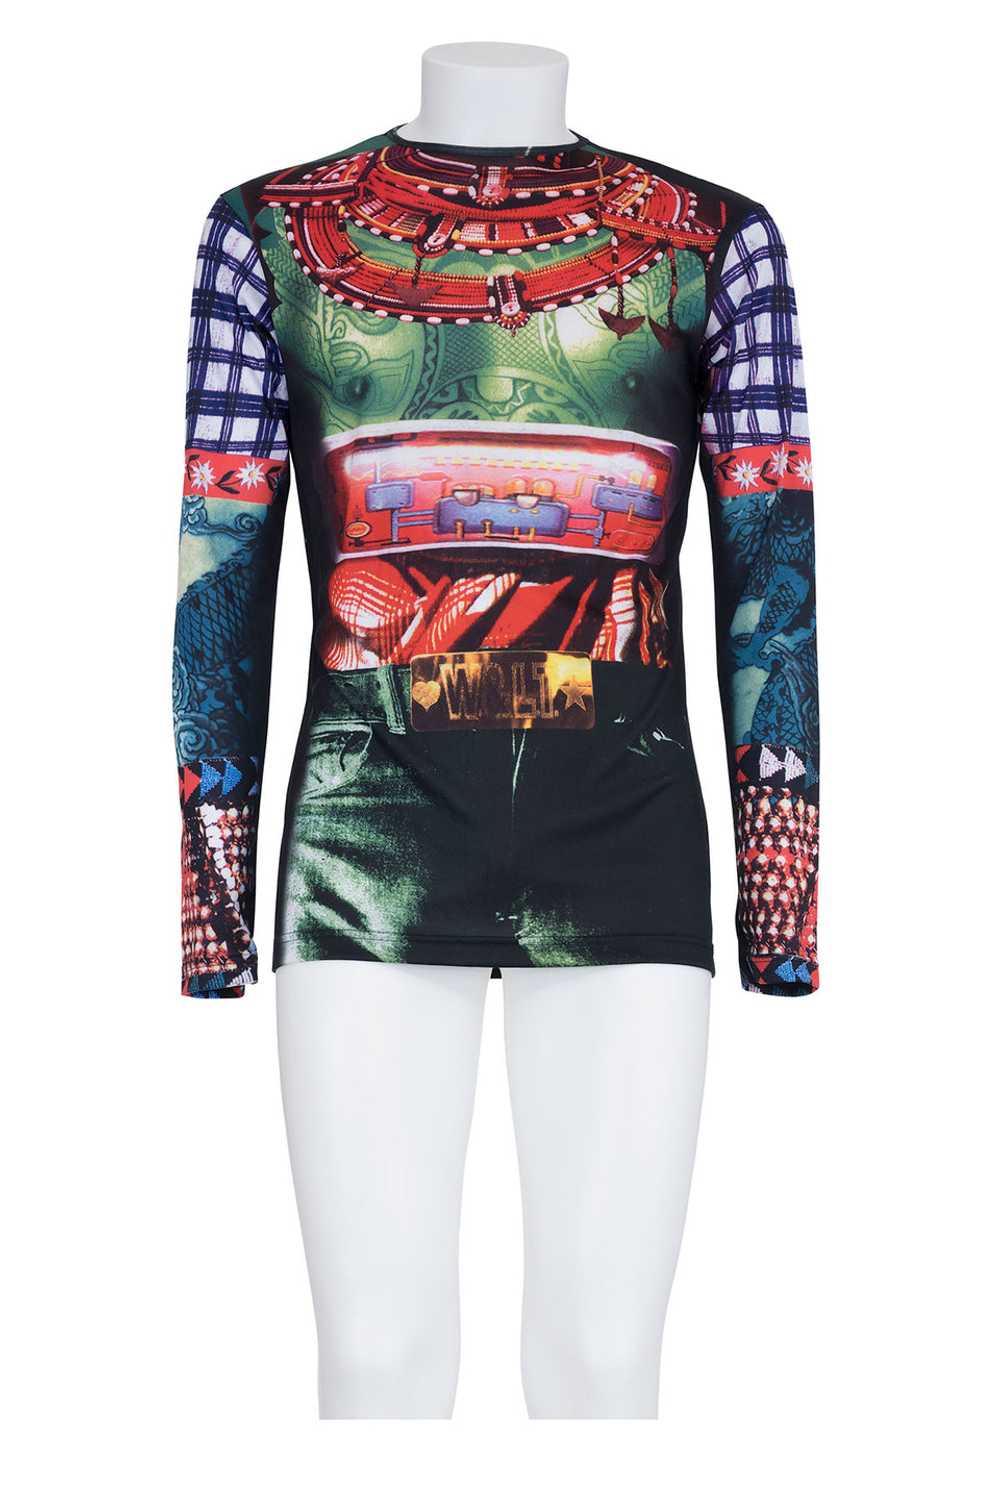 WILD AND LETHAL TRASH SS 96 LONG SLEEVE PRINTED T… - image 2